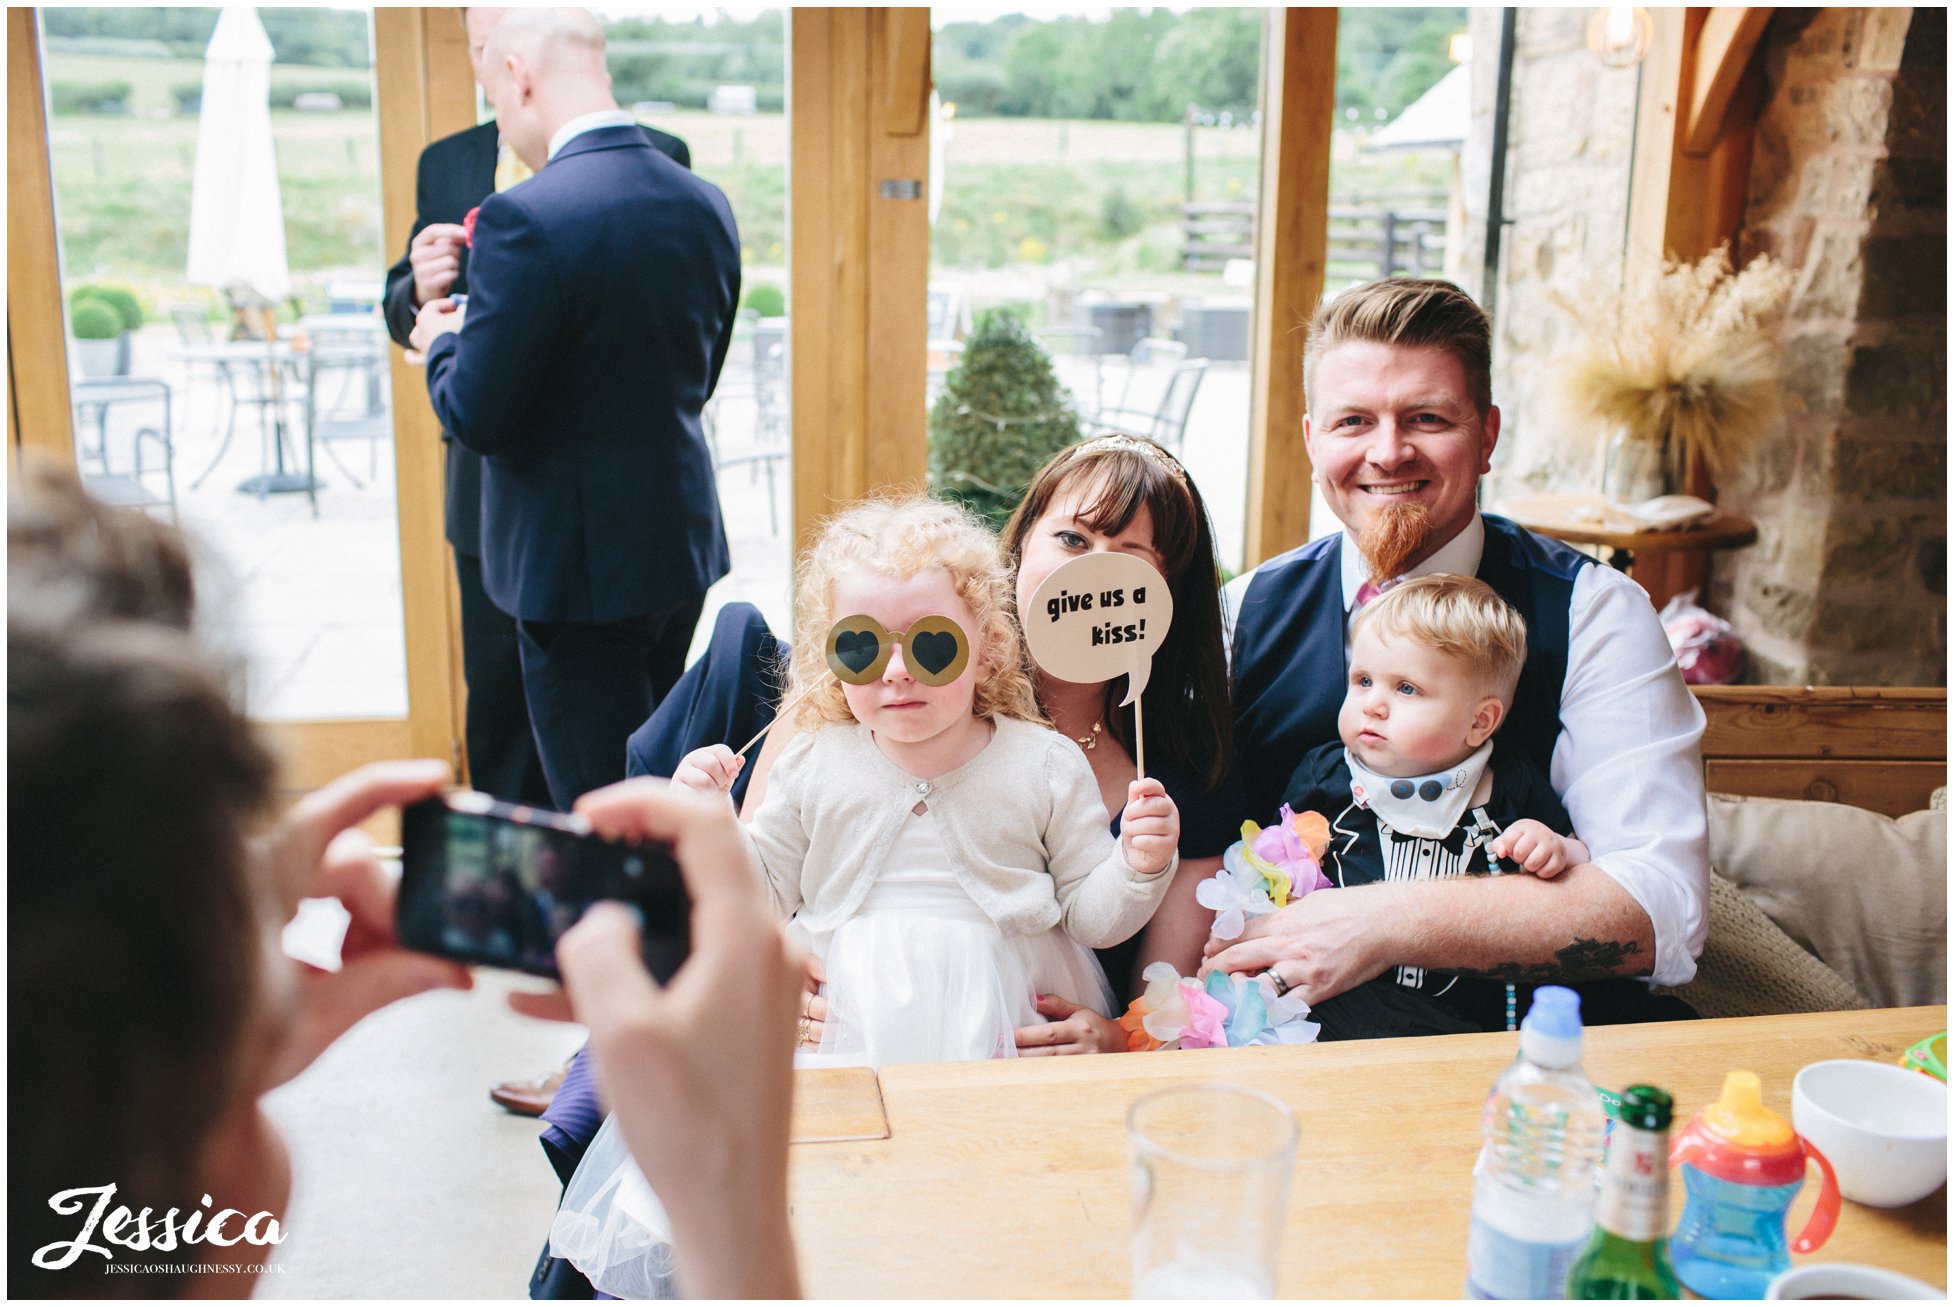 family pose for a photograph during the wedding reception at a north wales wedding